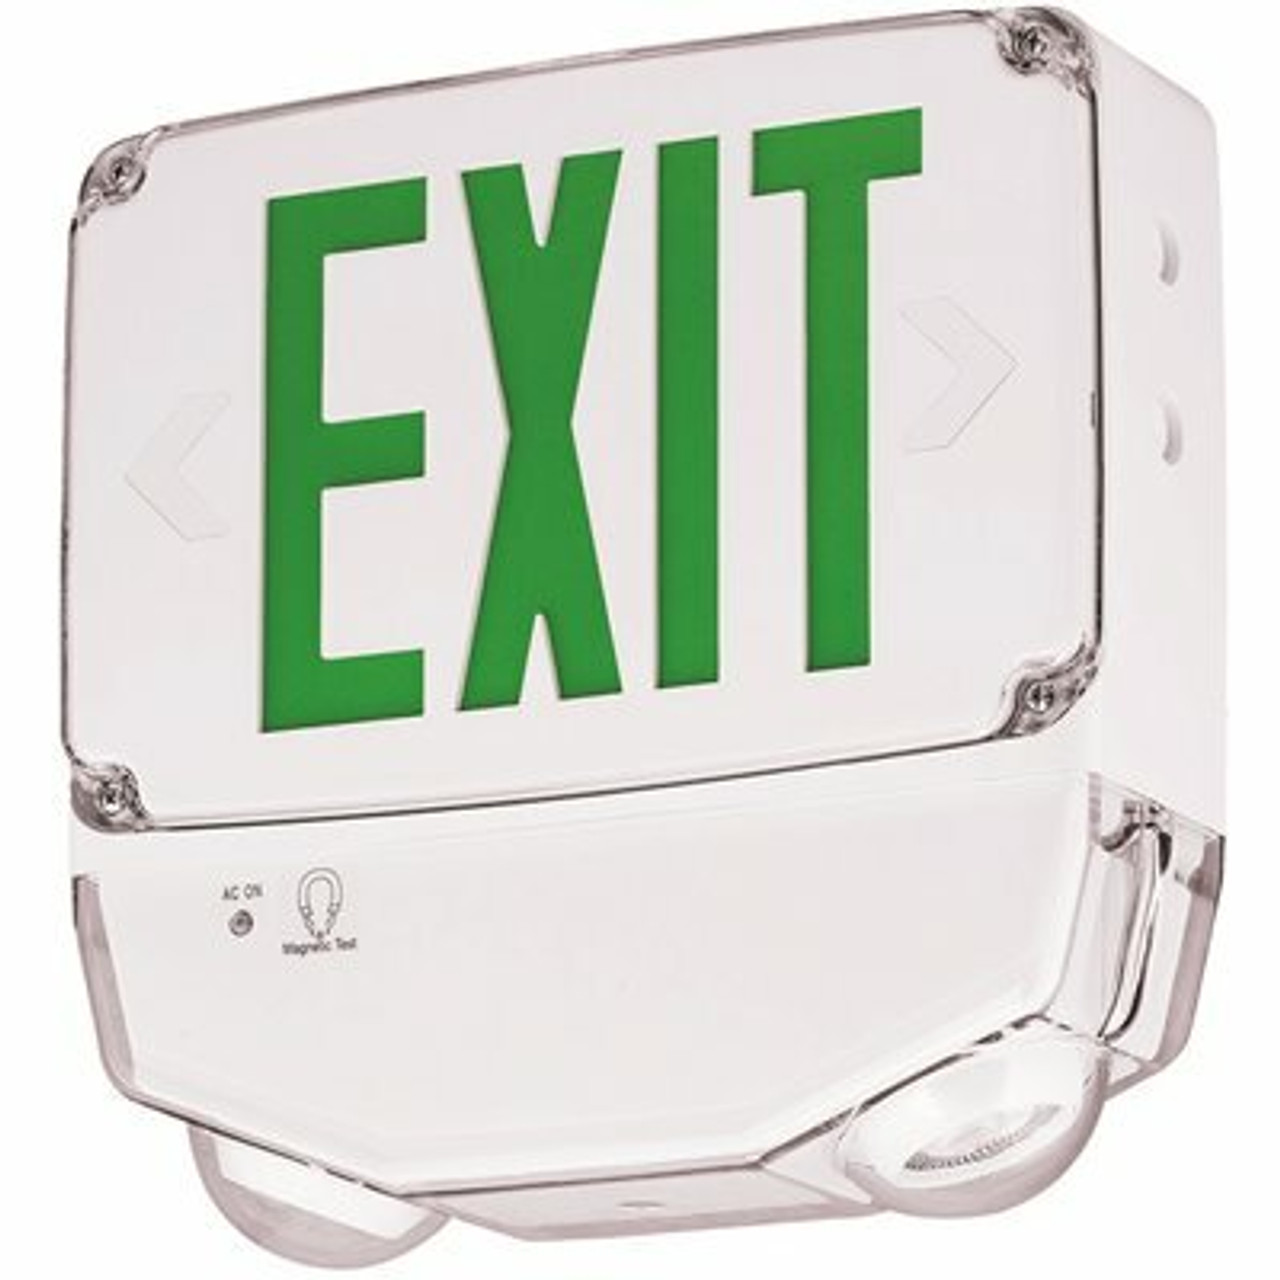 Hubbell Lighting Tradeselect 5.2-Watt 6-Volt Dc White Integrated Led Exit/Emergency Combination Light Wet Location - 3580310